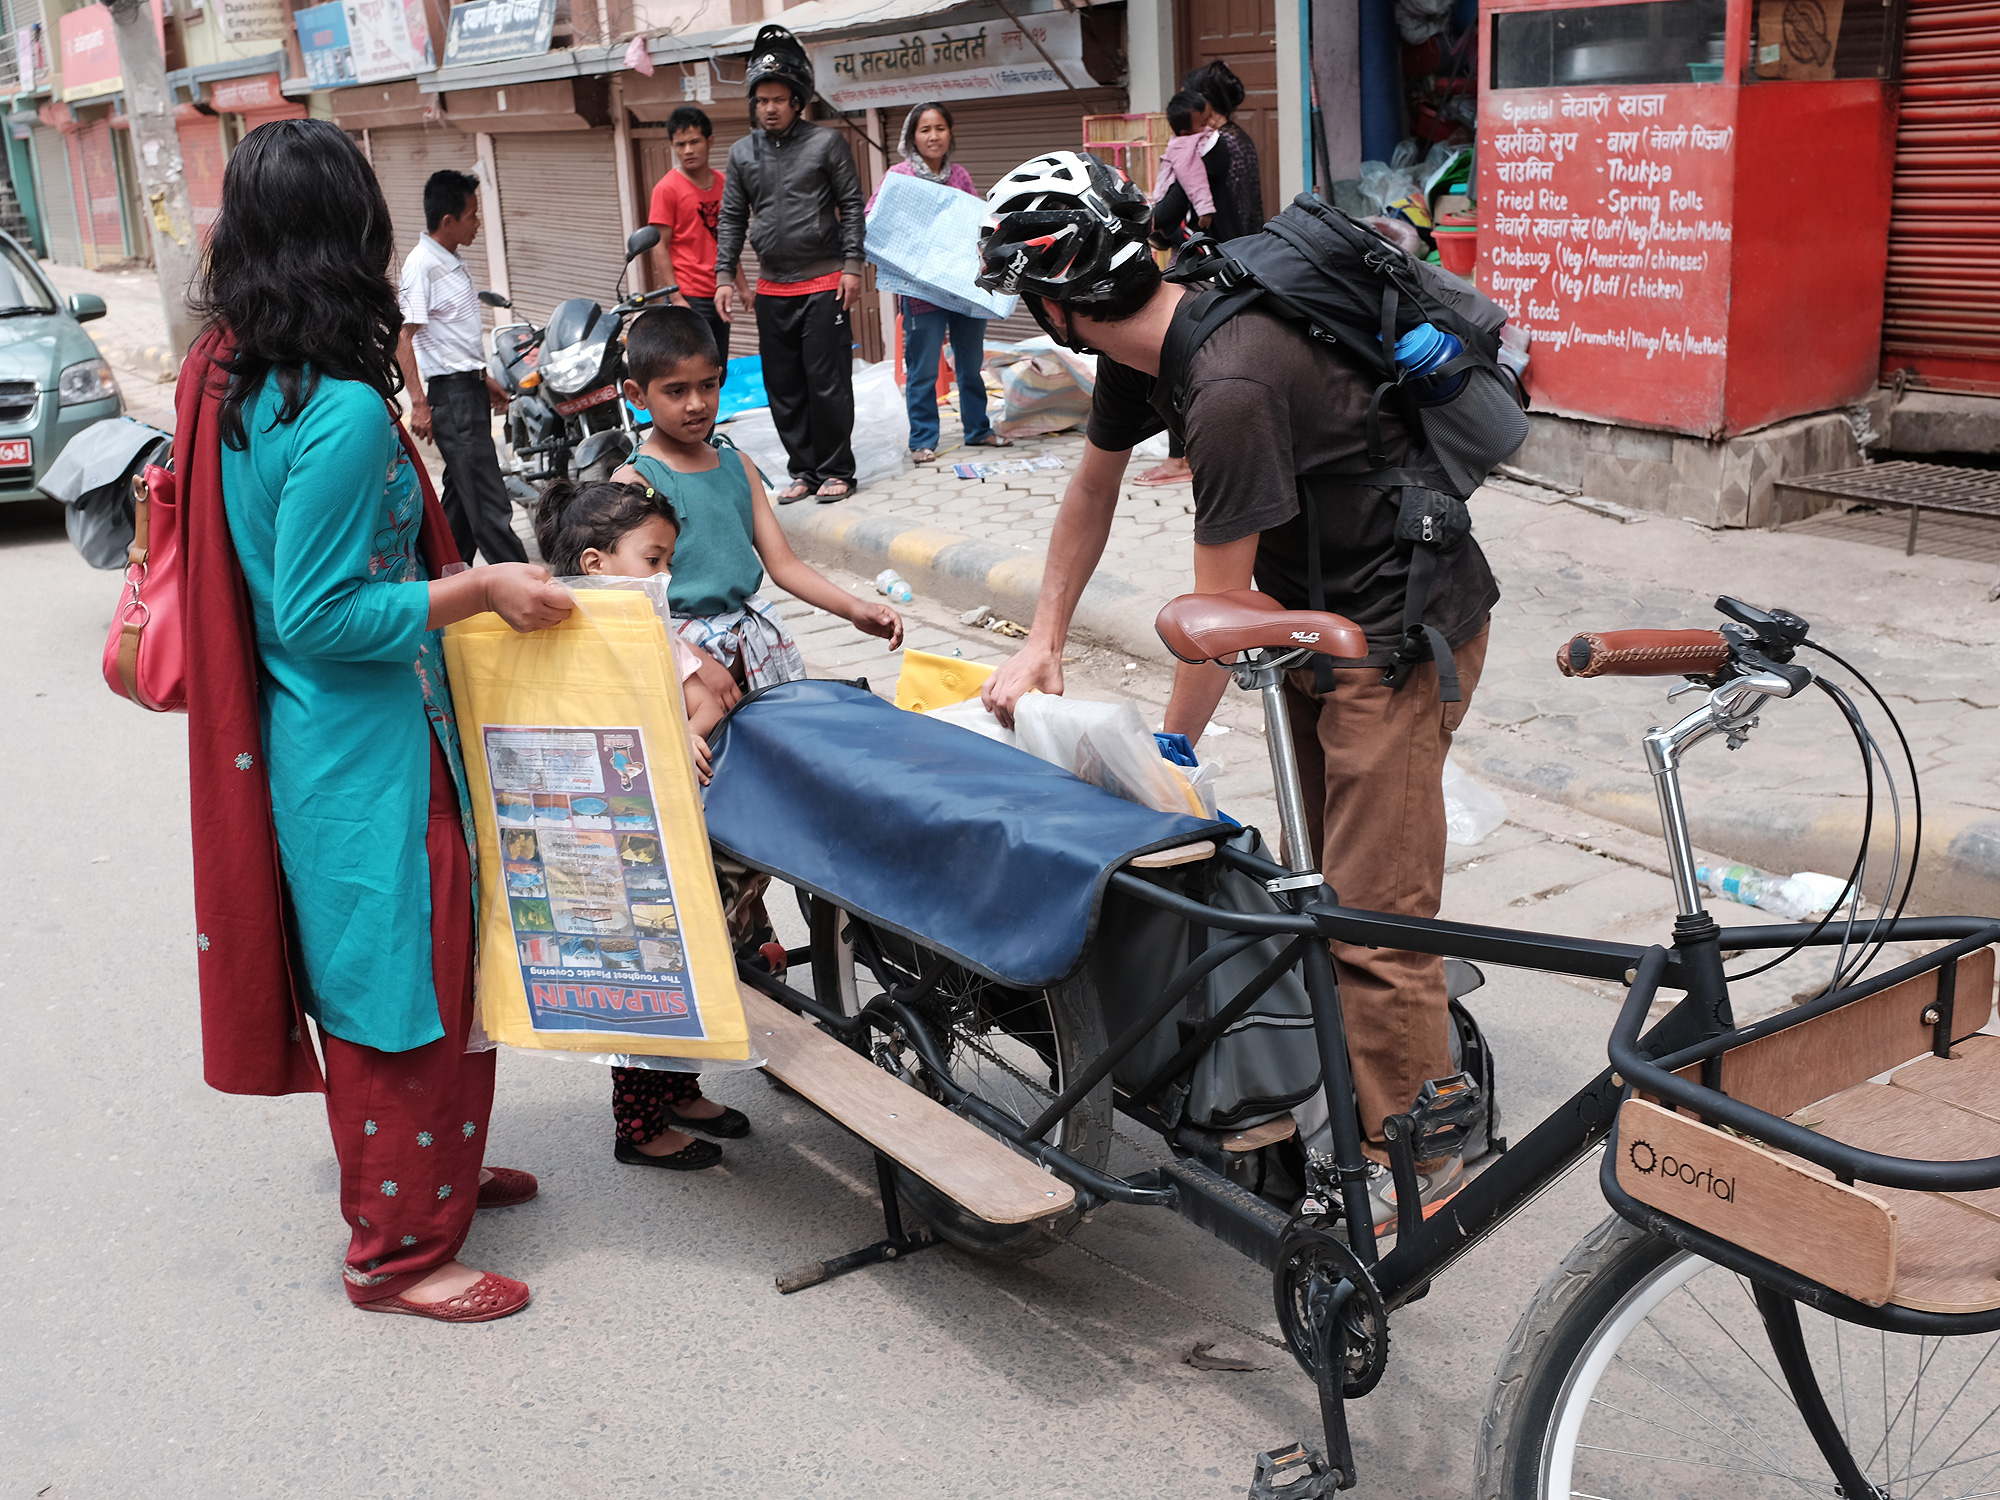 Mountain bike team member hands out tarpaulin in villages in need of relief after the Nepal earthquake of April 25, 2015